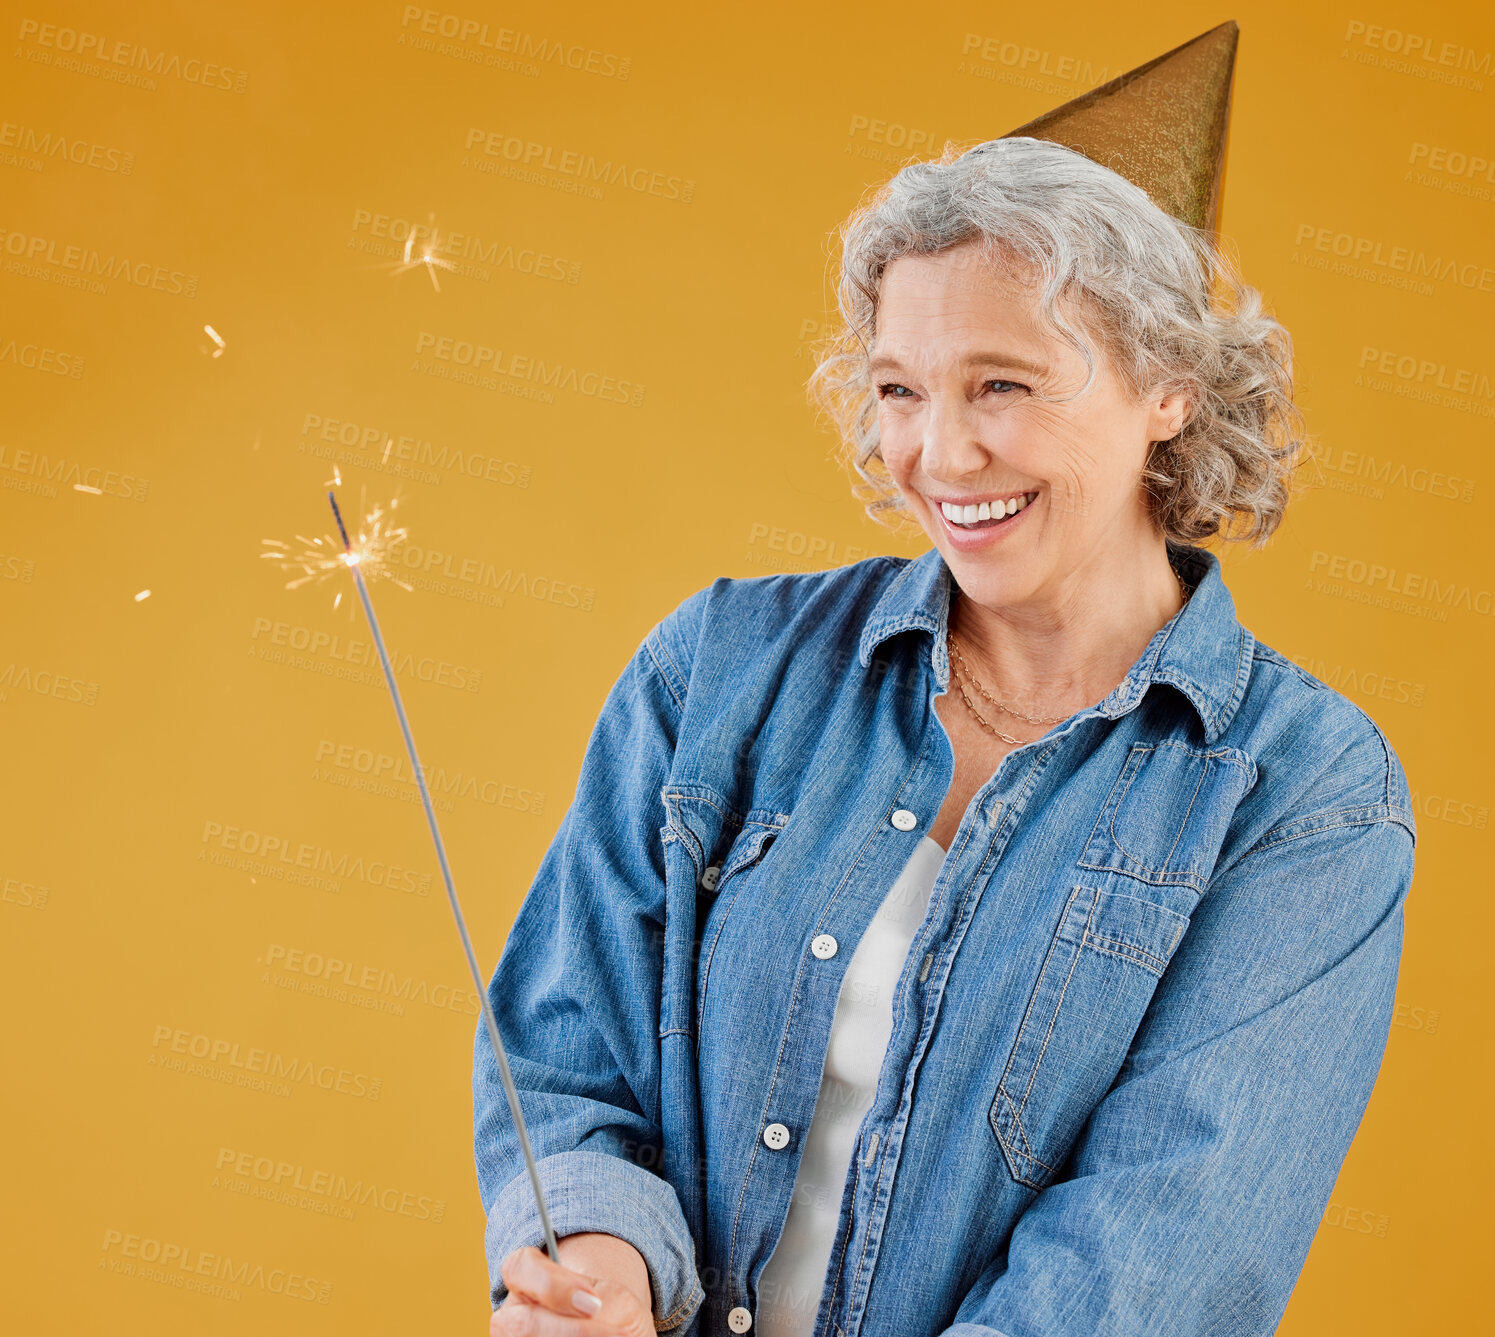 Buy stock photo One happy mature caucasian woman playing with a sparkler on her birthday while posing against a yellow background in the studio. Smiling white lady showing joy and happiness while celebrating